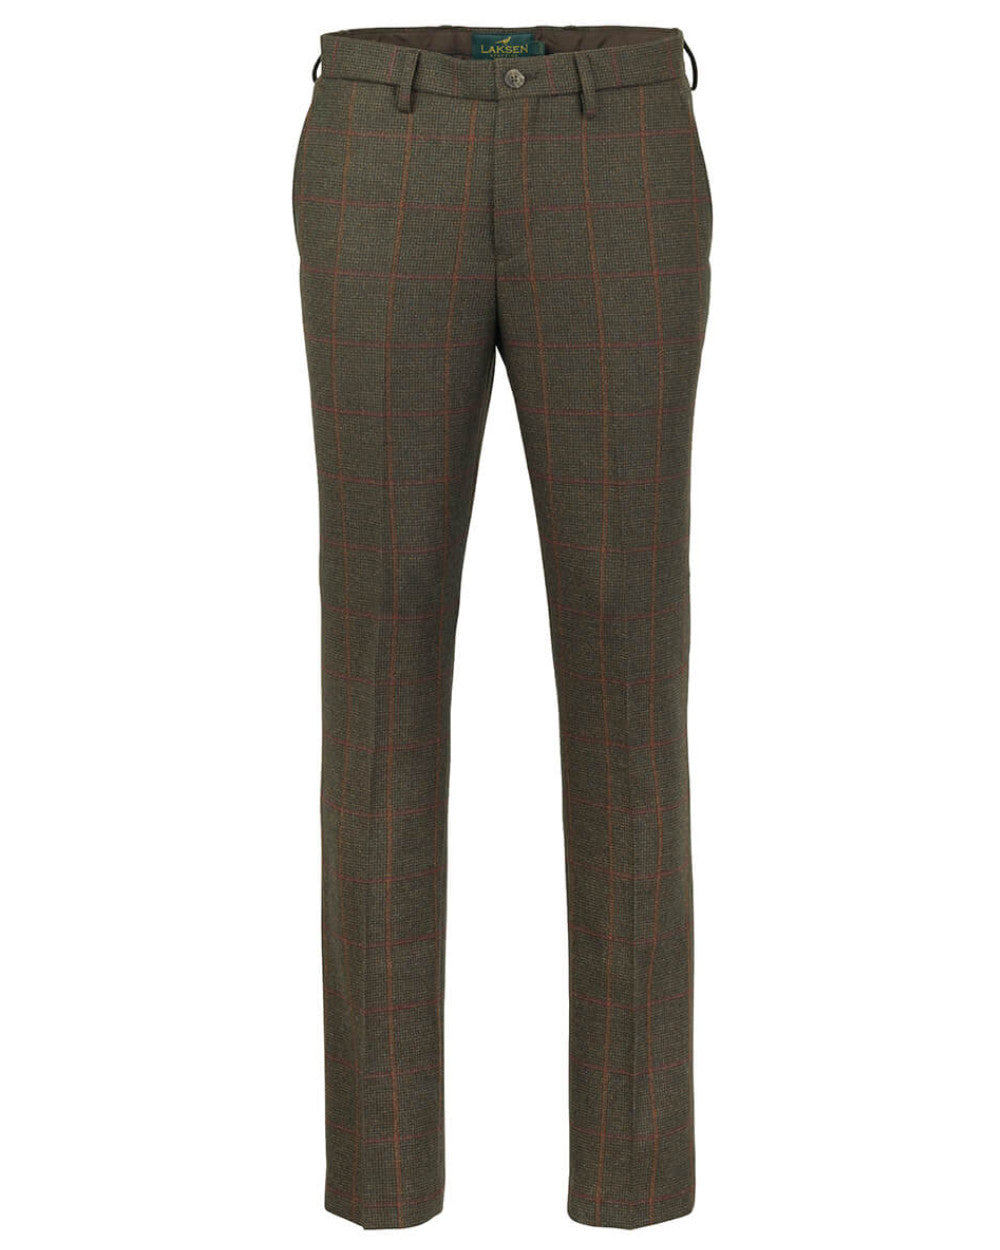 Laksen Hastings Tweed Trousers On A White Background